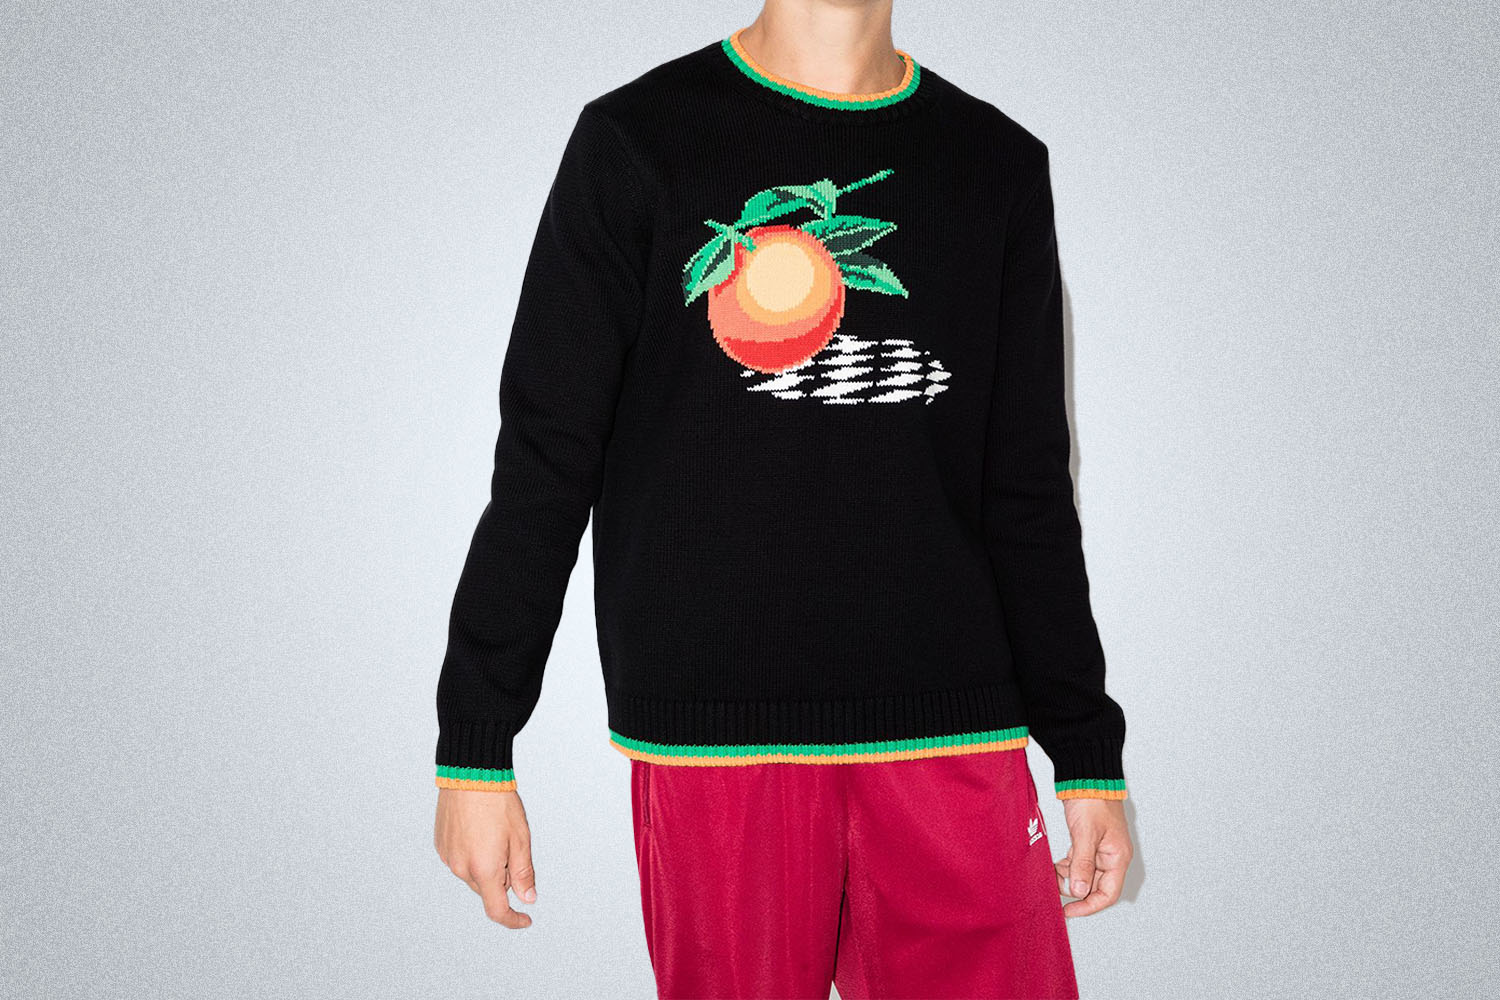 a sweater with an orange graphic on it